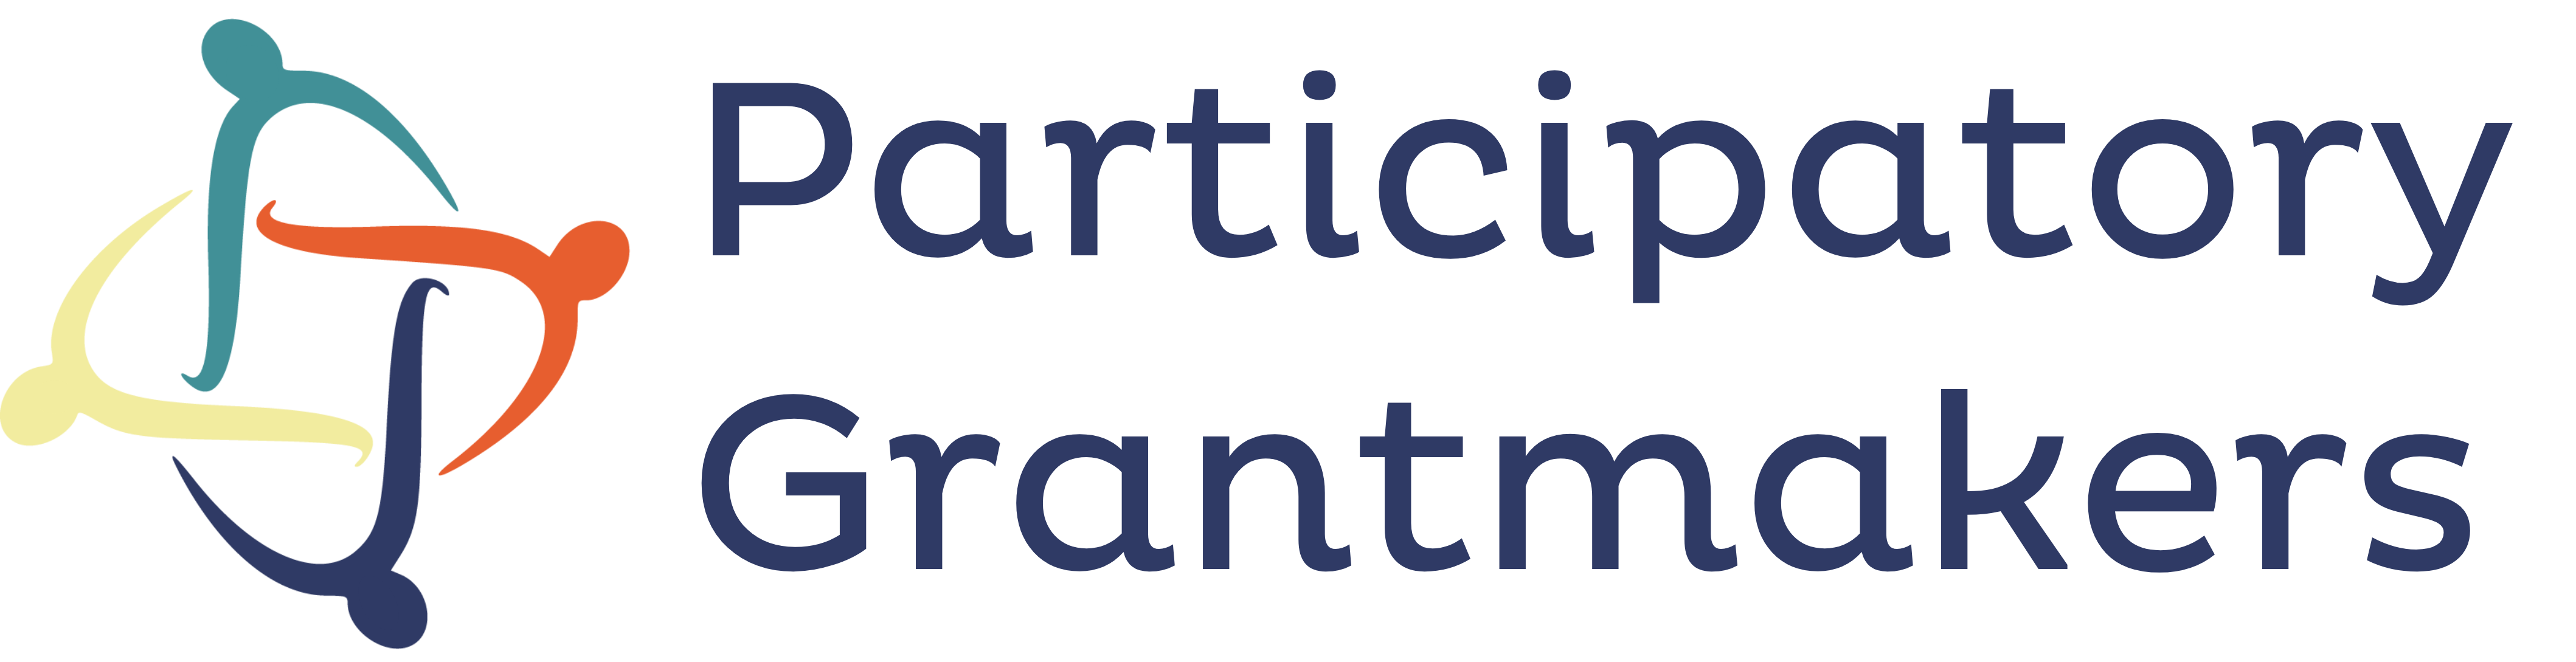 Participatory Grantmakers Community